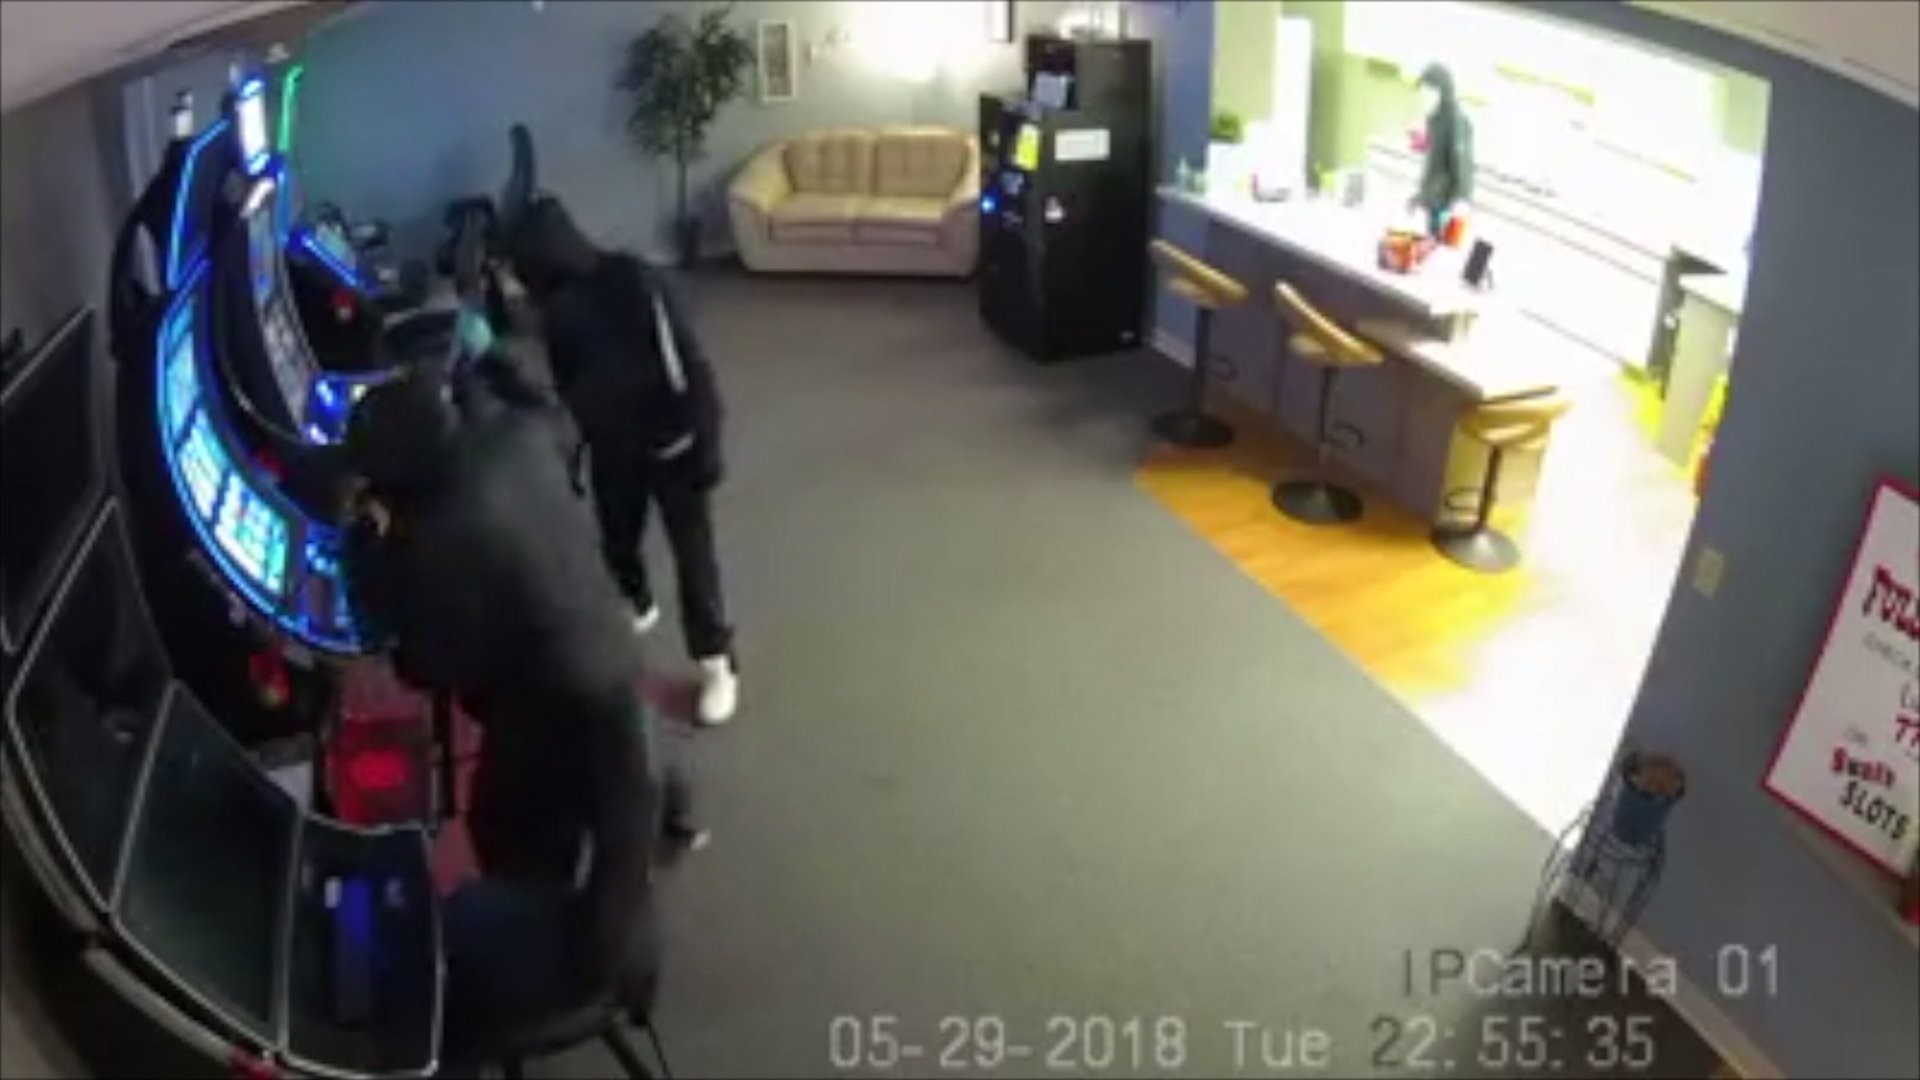 Armed robbery at video gambling parlor caught on video